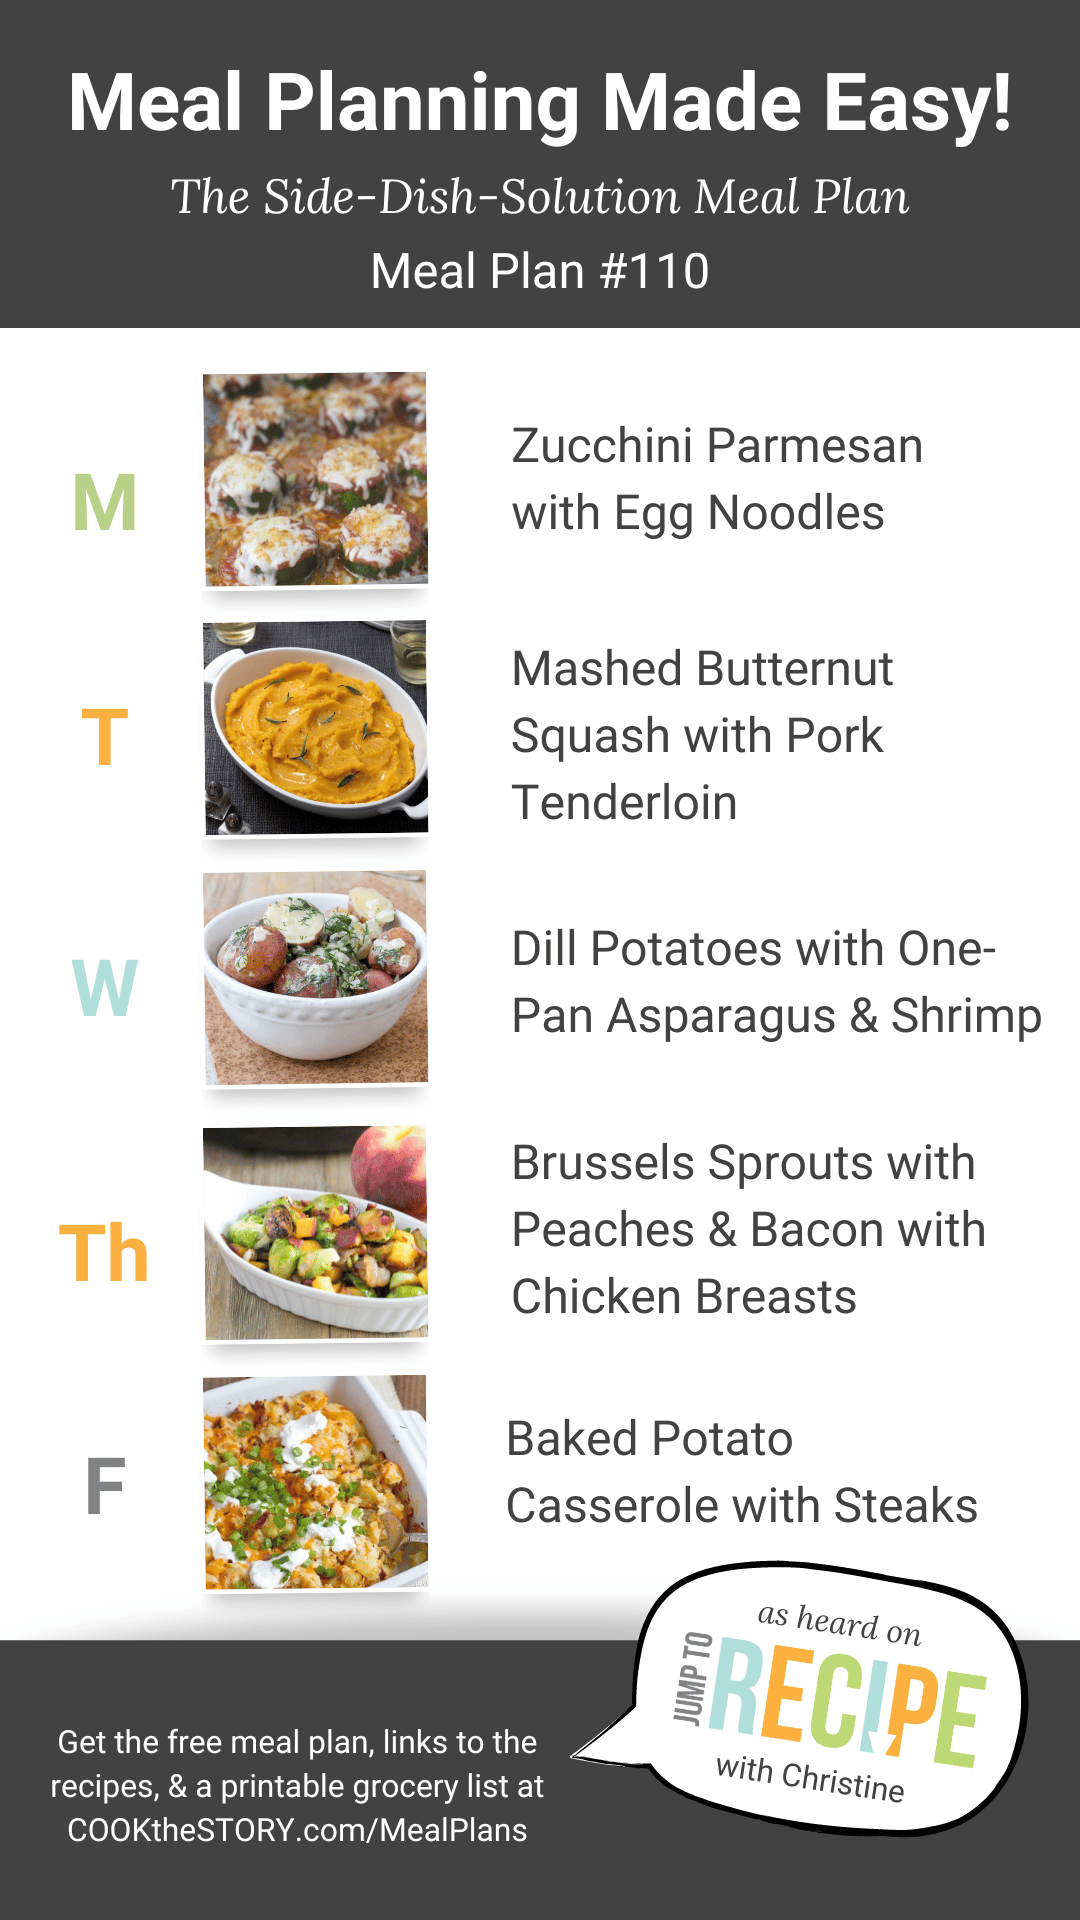 Meal Plan #110: The Side-Dish-Solution Meal Plan